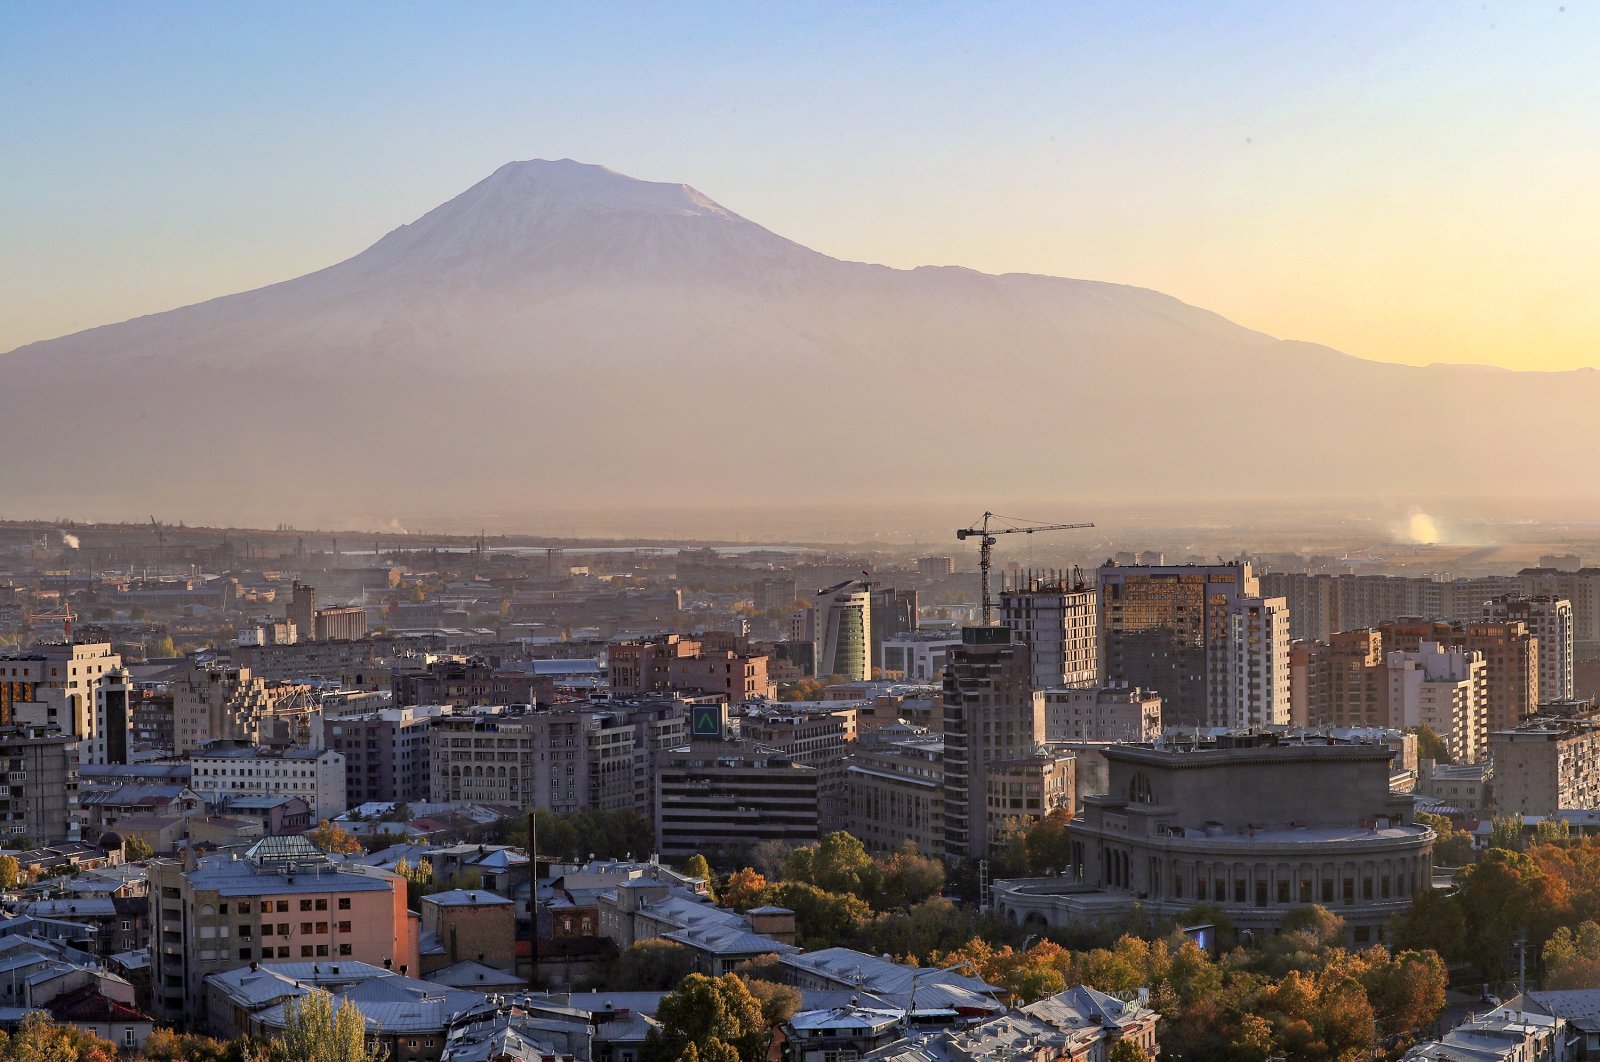  A view of the Yerevan city as Mount Ararat on the Turkish territory is seen in the background, Yerevan, Armenia, Nov 23, 2020. (TASS)